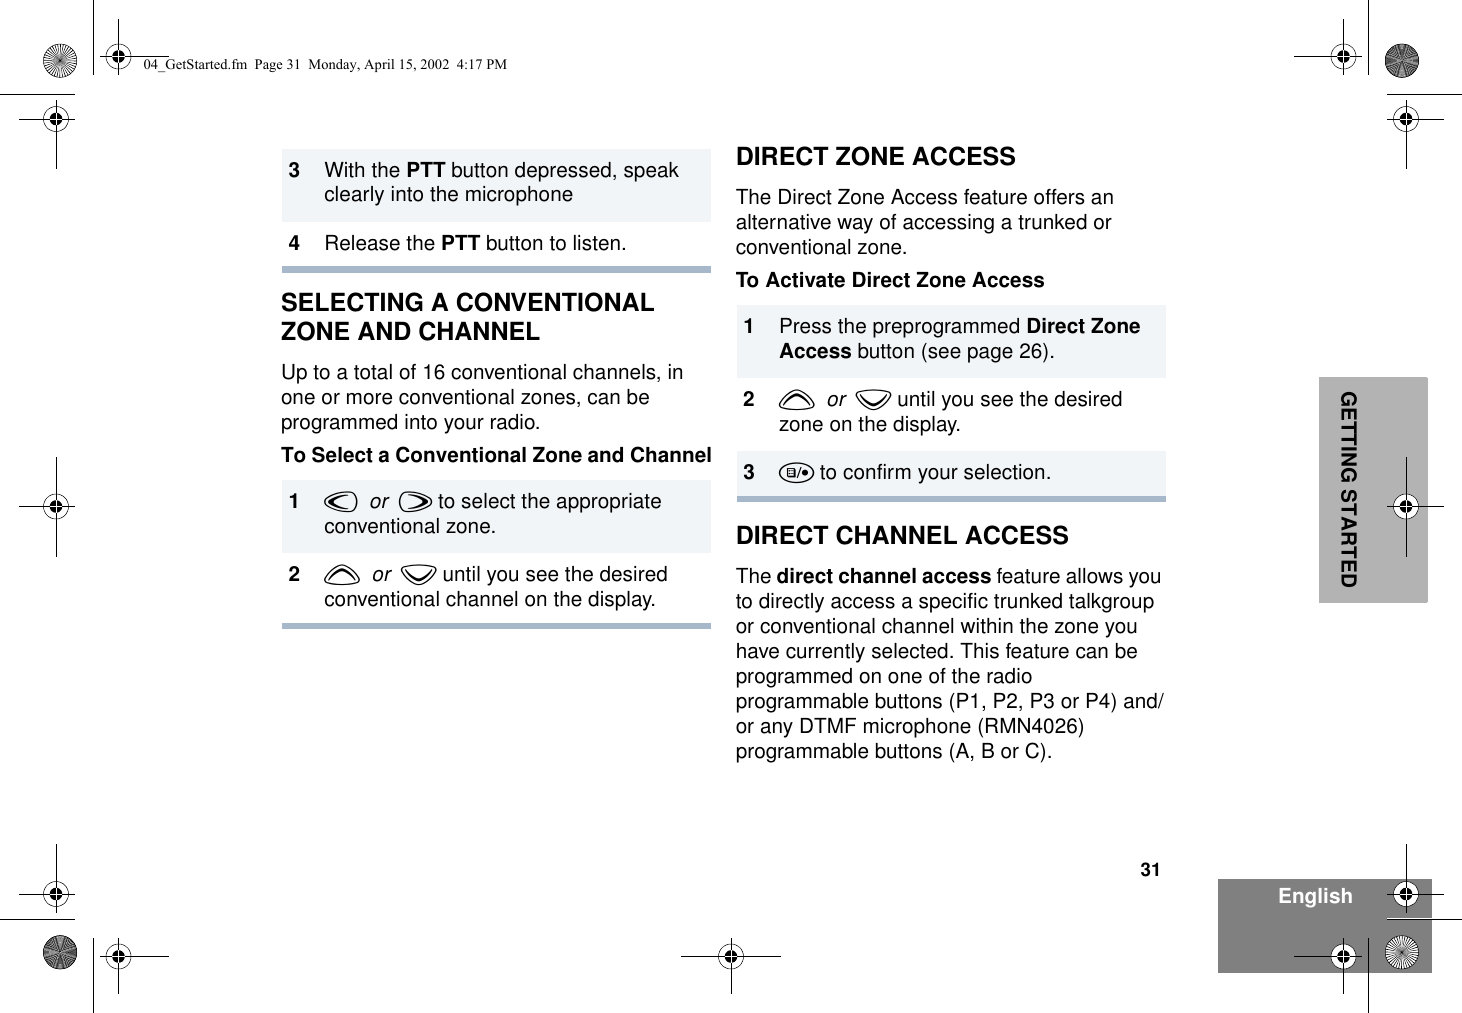 31EnglishGETTING STARTEDSELECTING A CONVENTIONAL ZONE AND CHANNELUp to a total of 16 conventional channels, in one or more conventional zones, can be programmed into your radio. To Select a Conventional Zone and ChannelDIRECT ZONE ACCESSThe Direct Zone Access feature offers an alternative way of accessing a trunked or conventional zone. To Activate Direct Zone AccessDIRECT CHANNEL ACCESSThe direct channel access feature allows you to directly access a specific trunked talkgroup or conventional channel within the zone you have currently selected. This feature can be programmed on one of the radio programmable buttons (P1, P2, P3 or P4) and/or any DTMF microphone (RMN4026) programmable buttons (A, B or C).3With the PTT button depressed, speak clearly into the microphone4Release the PTT button to listen.1v  or  w to select the appropriate conventional zone.2y  or  z until you see the desired conventional channel on the display.1Press the preprogrammed Direct Zone Access button (see page 26).2y  or  z until you see the desired zone on the display.3u to confirm your selection.04_GetStarted.fm  Page 31  Monday, April 15, 2002  4:17 PM